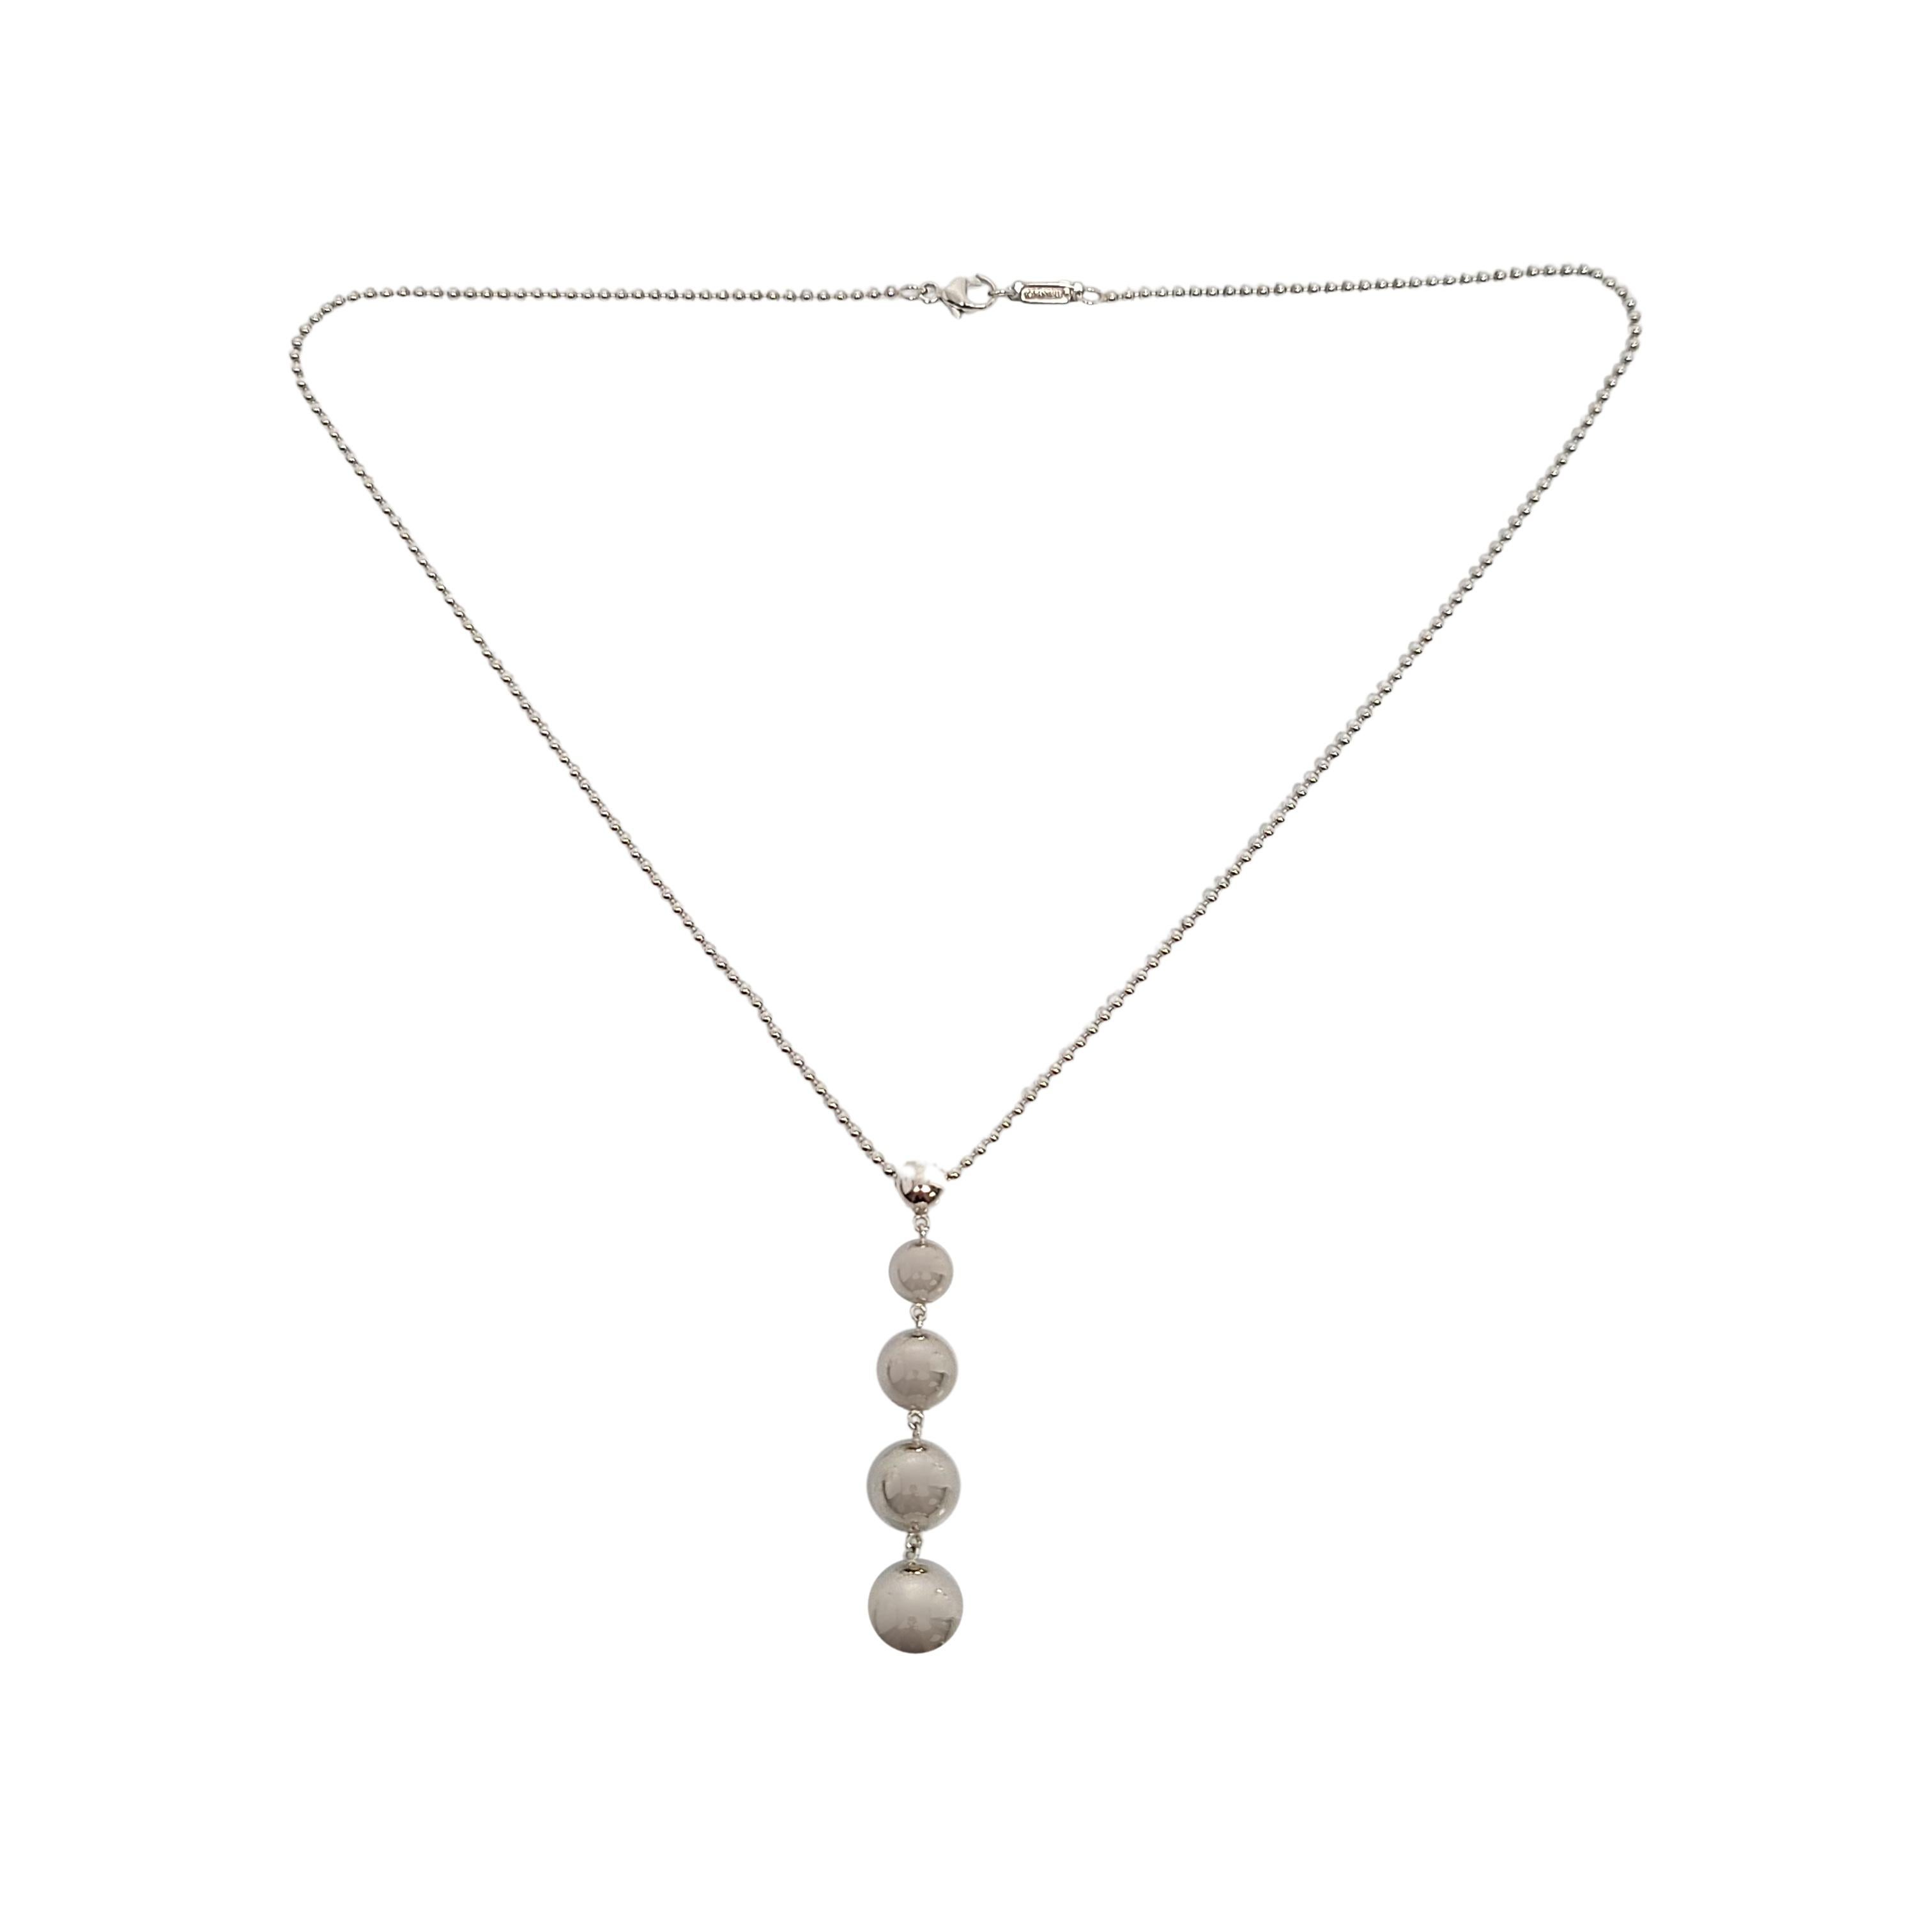 Tiffany & Co sterling silver graduated bead necklace.

An authentic Tiffany & Co necklace featuring a dangle of 5 graduated silver beads on a delicate ball chain. Tiffany box or pouch not included.

Chain measures approx 16